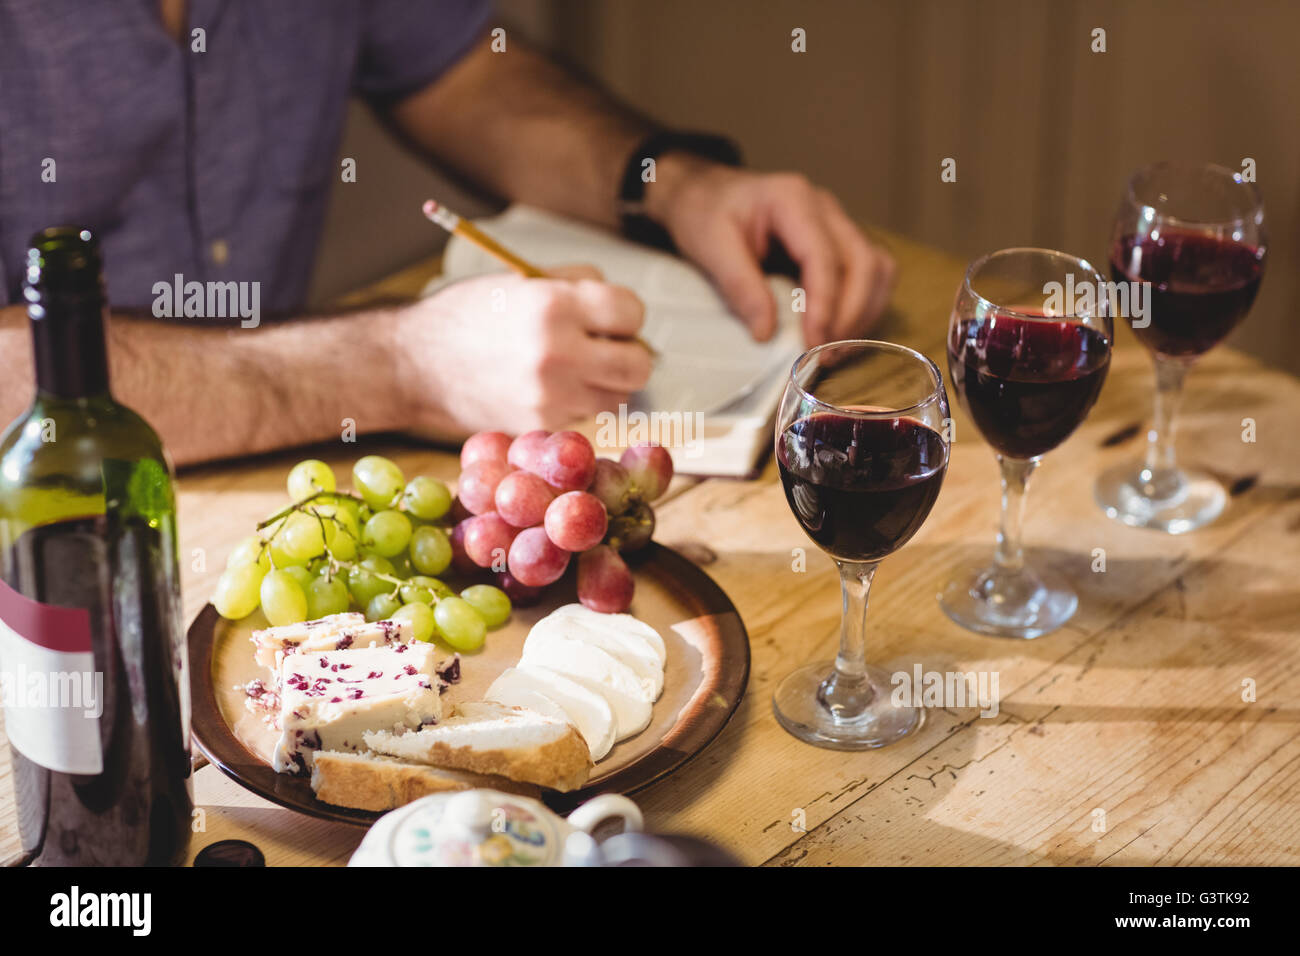 Cropped image of mature man writing in a book while tasting red wine and eating cheese Stock Photo